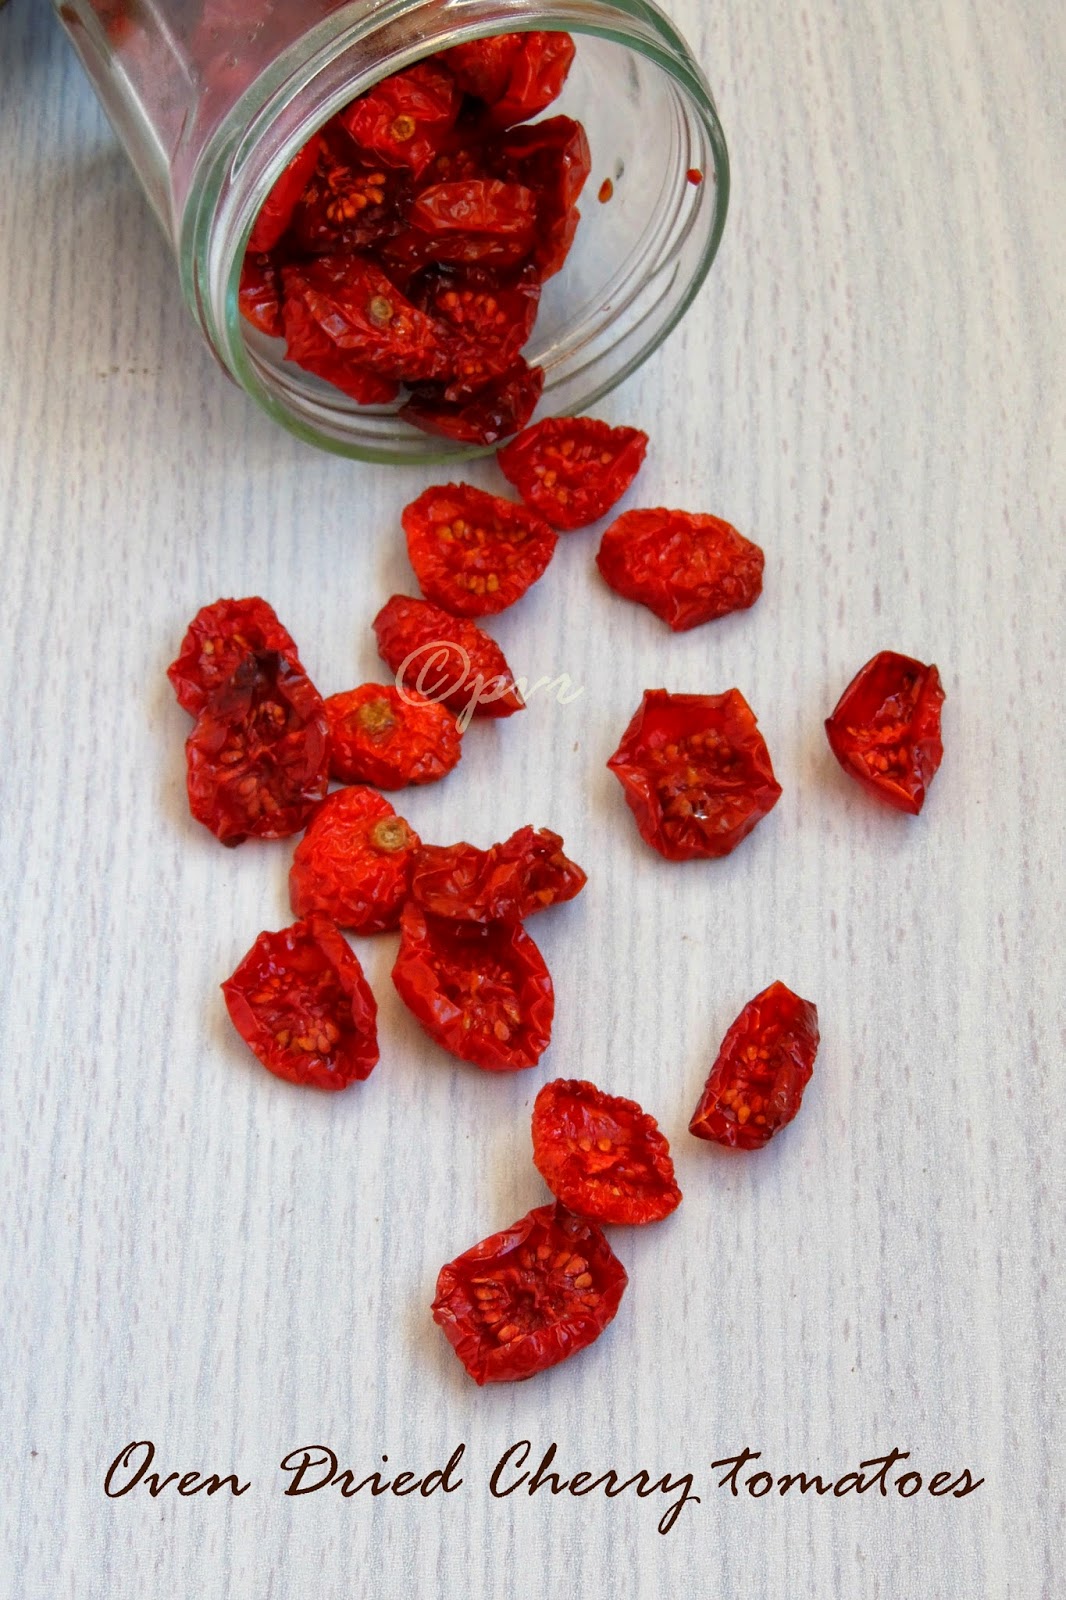 Oil less oven dried cherry tomatoes, oven dried cherry tomatoes,slow oven dried cherry tomatoes